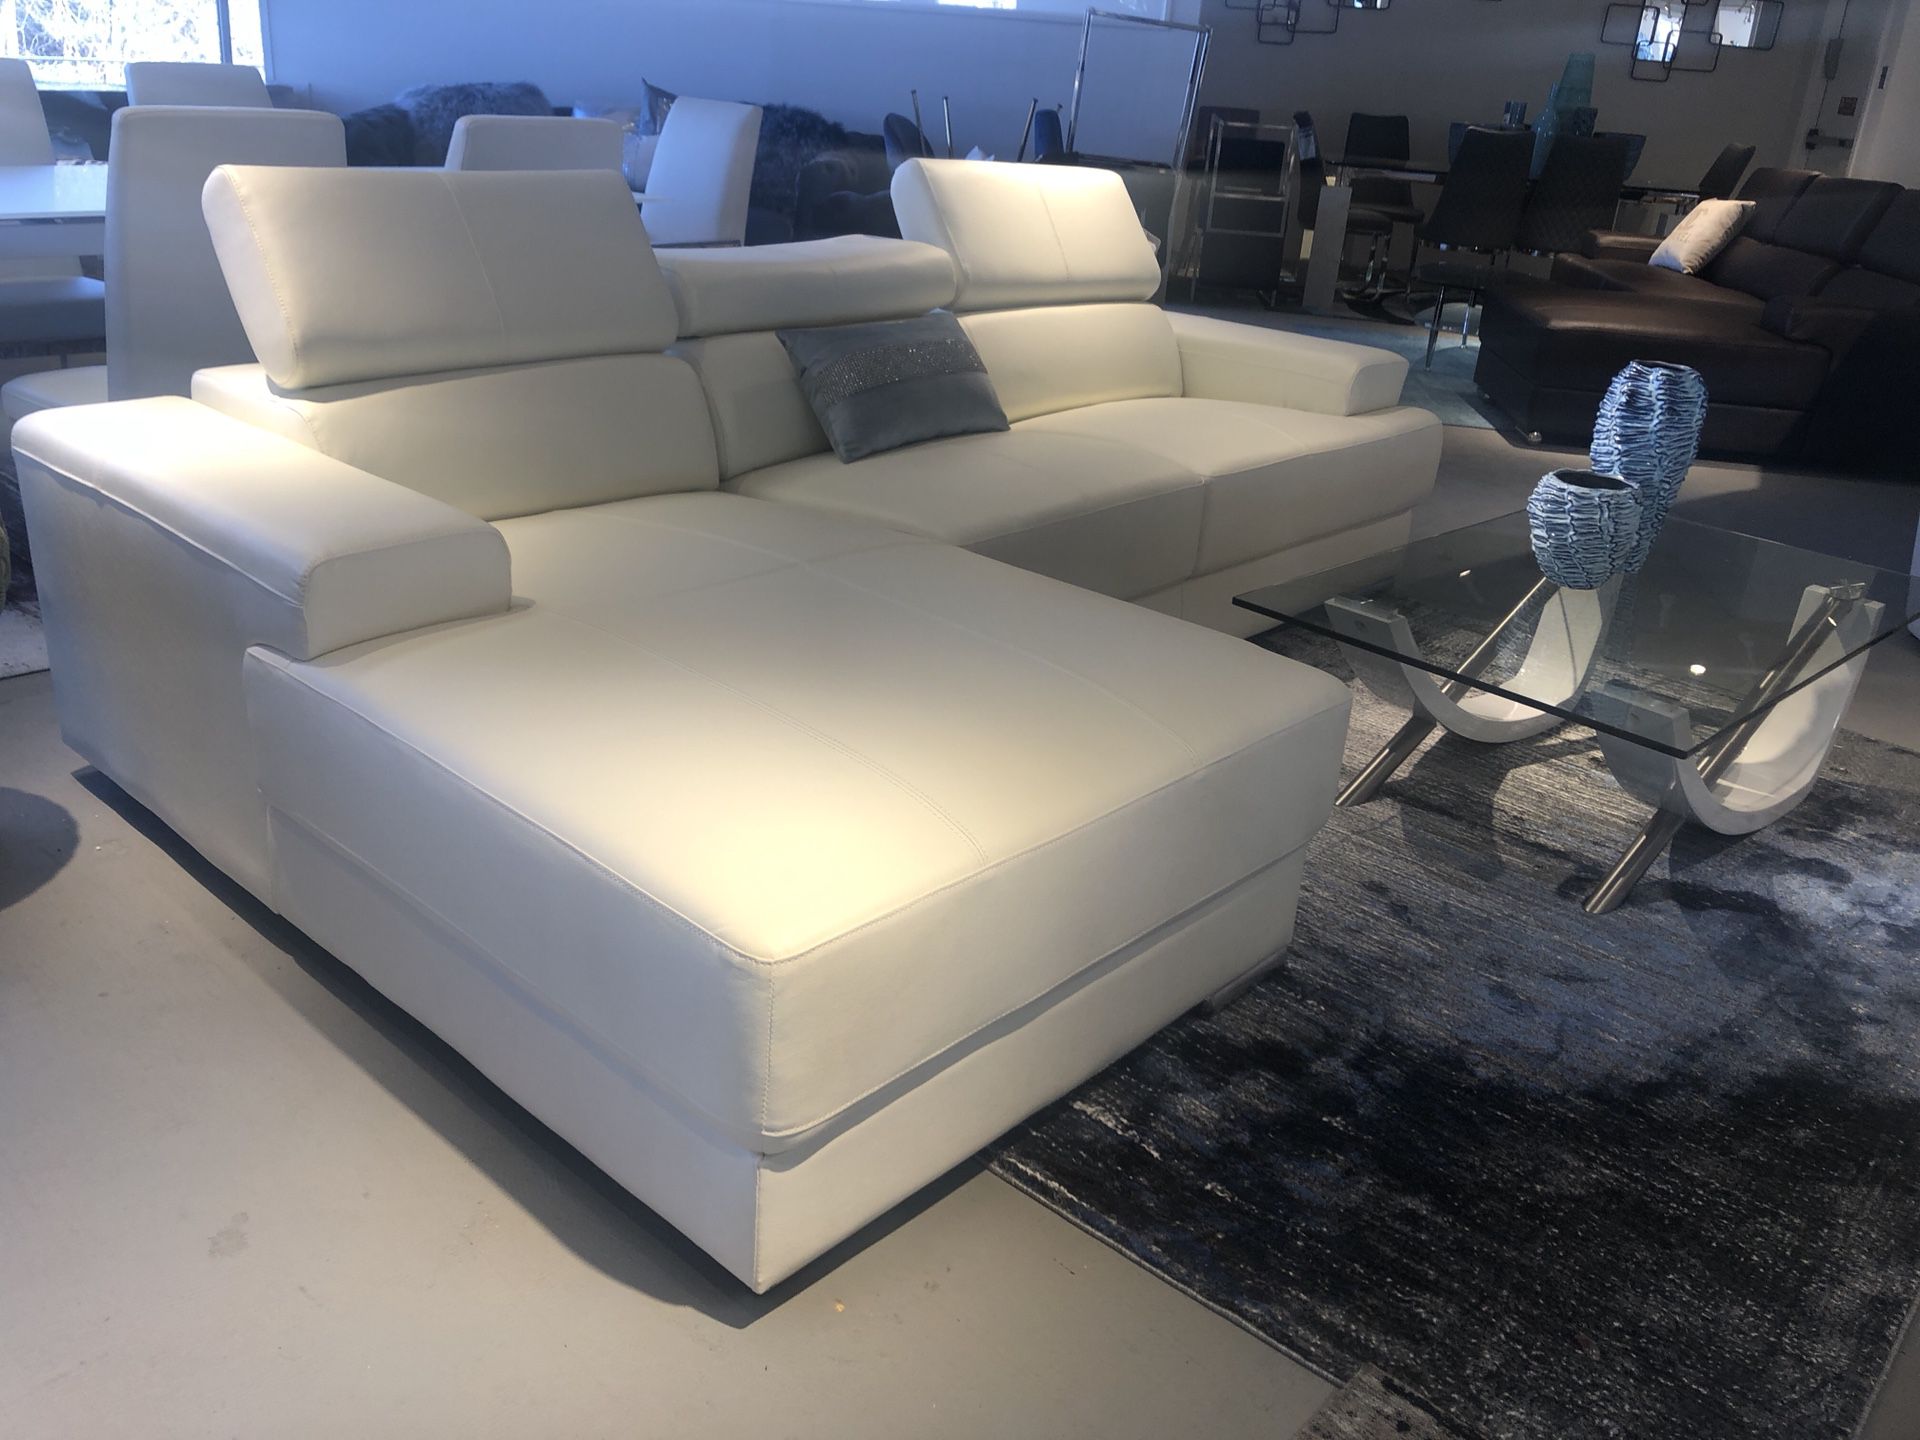 White leather sectional sofa - adjustable head rests